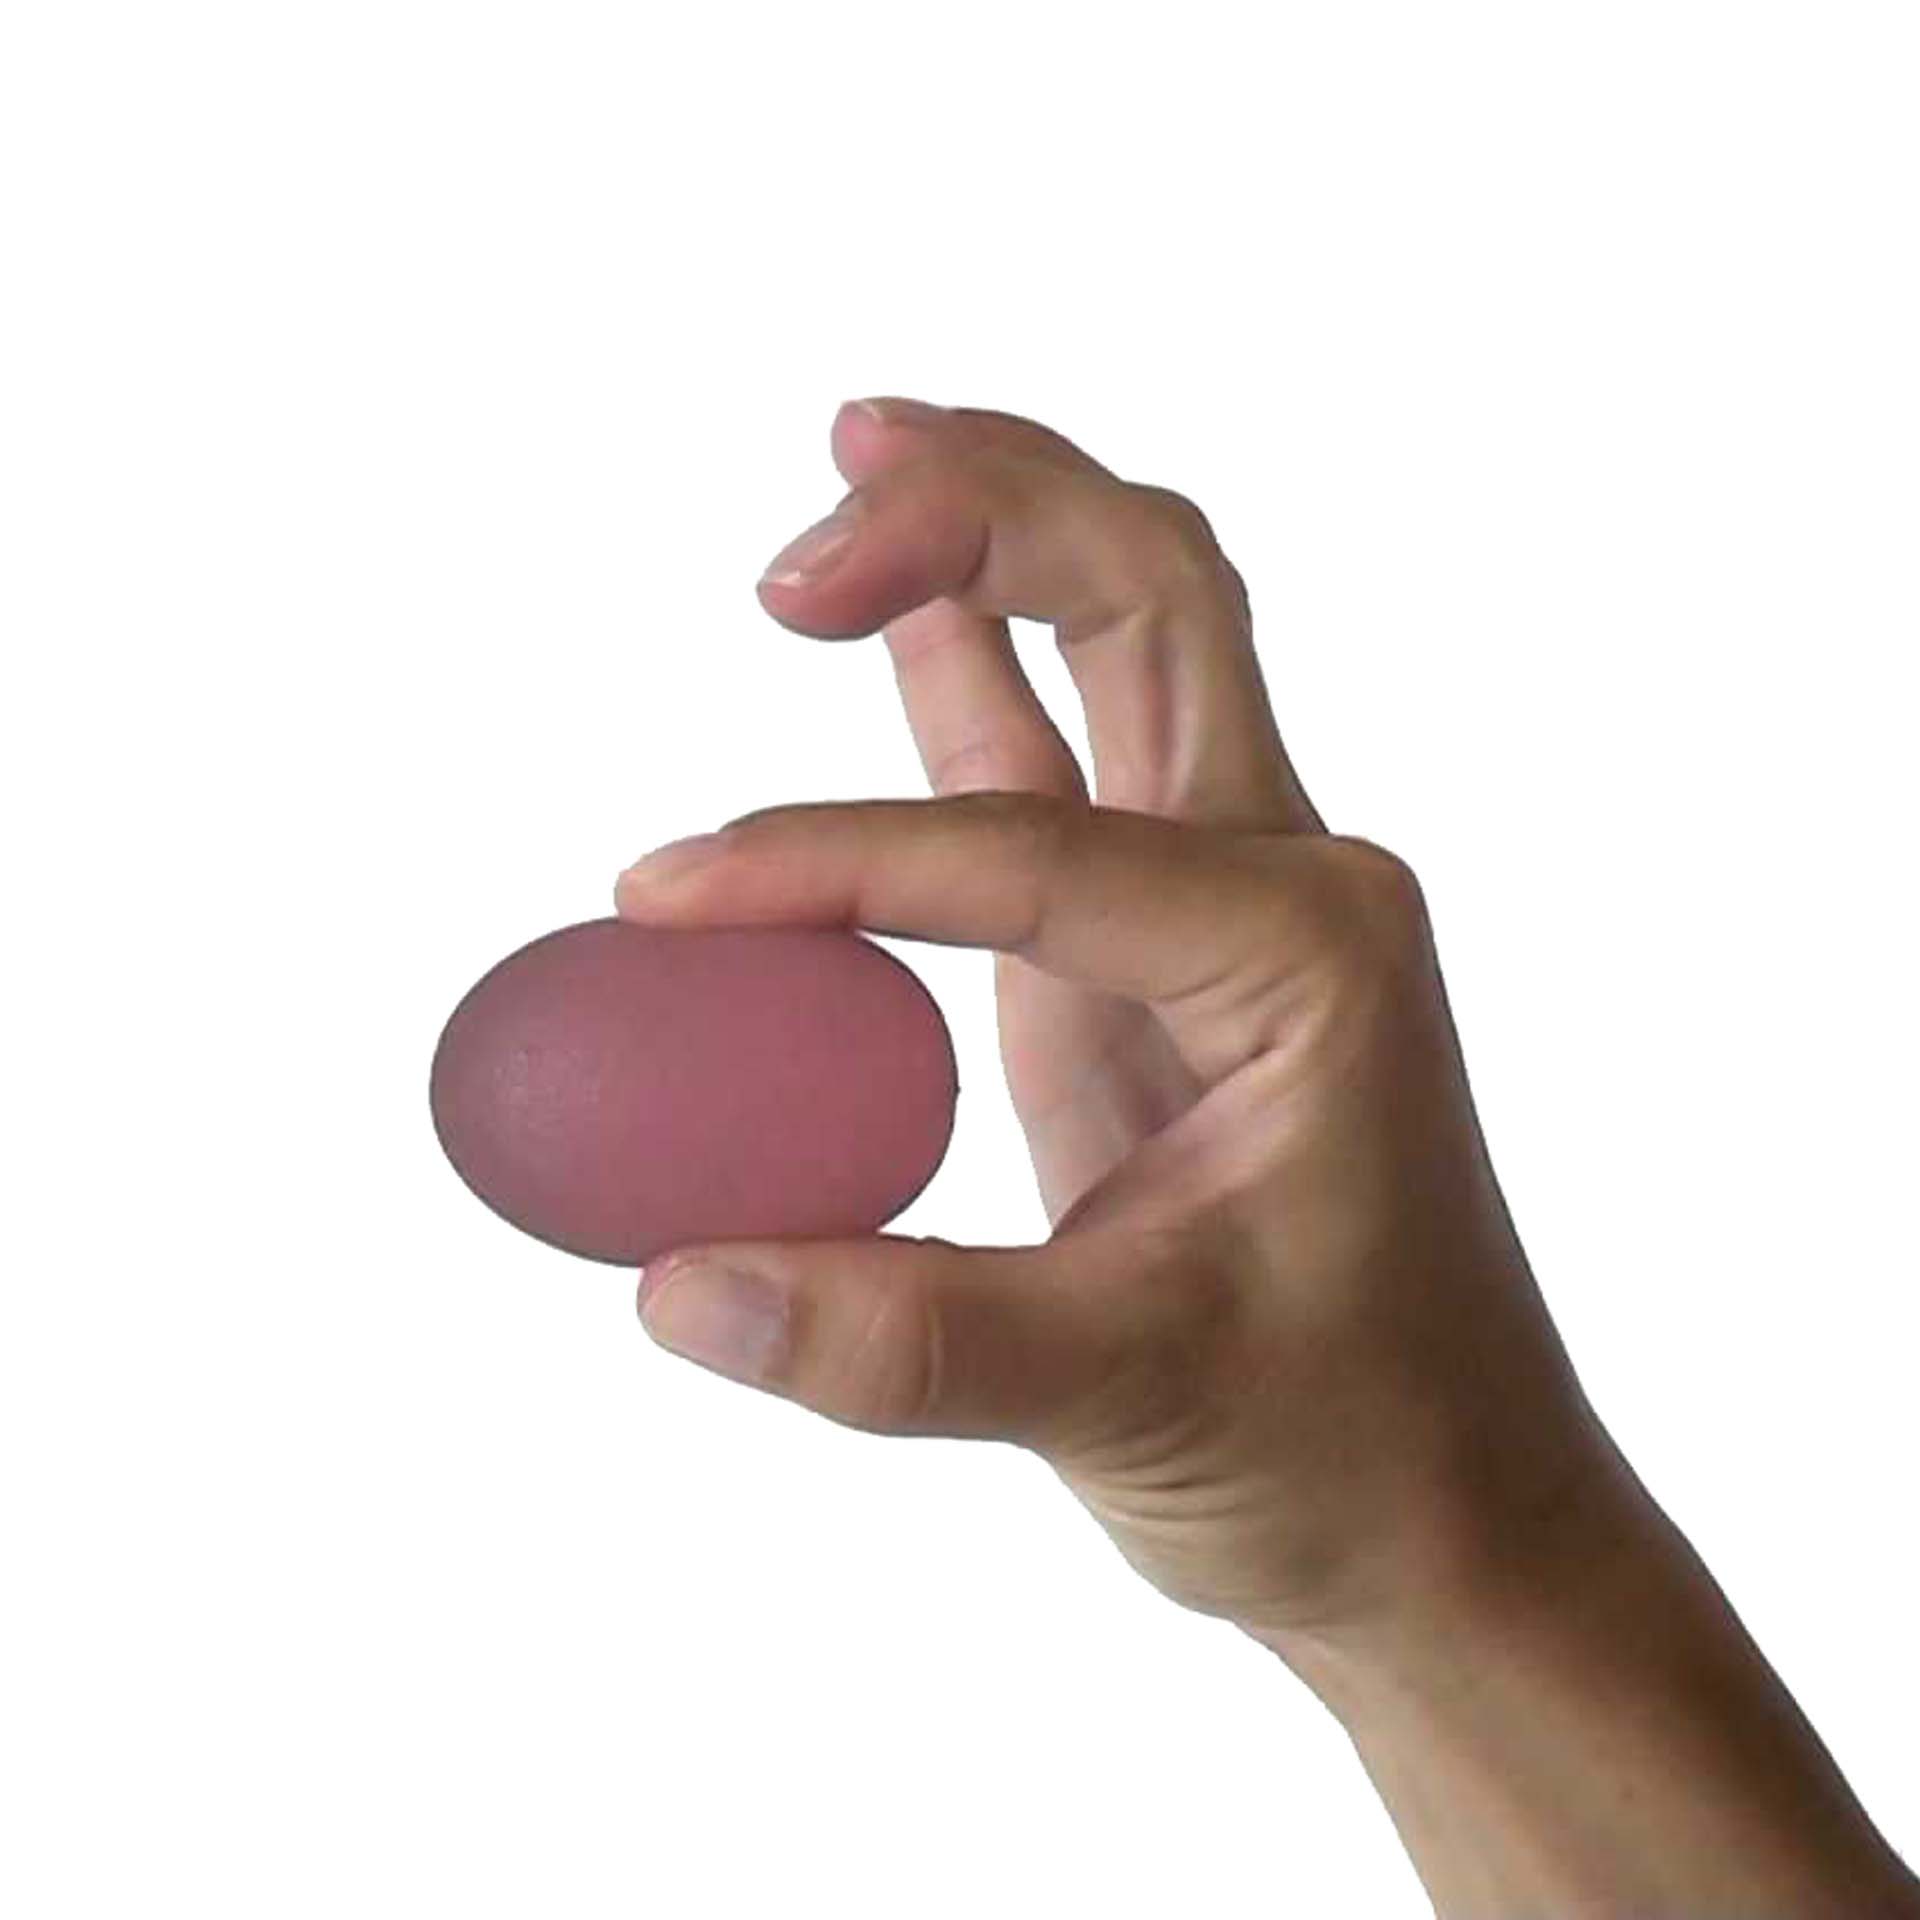 Image of a pink Sissel Press Egg being pressed by someone's hand